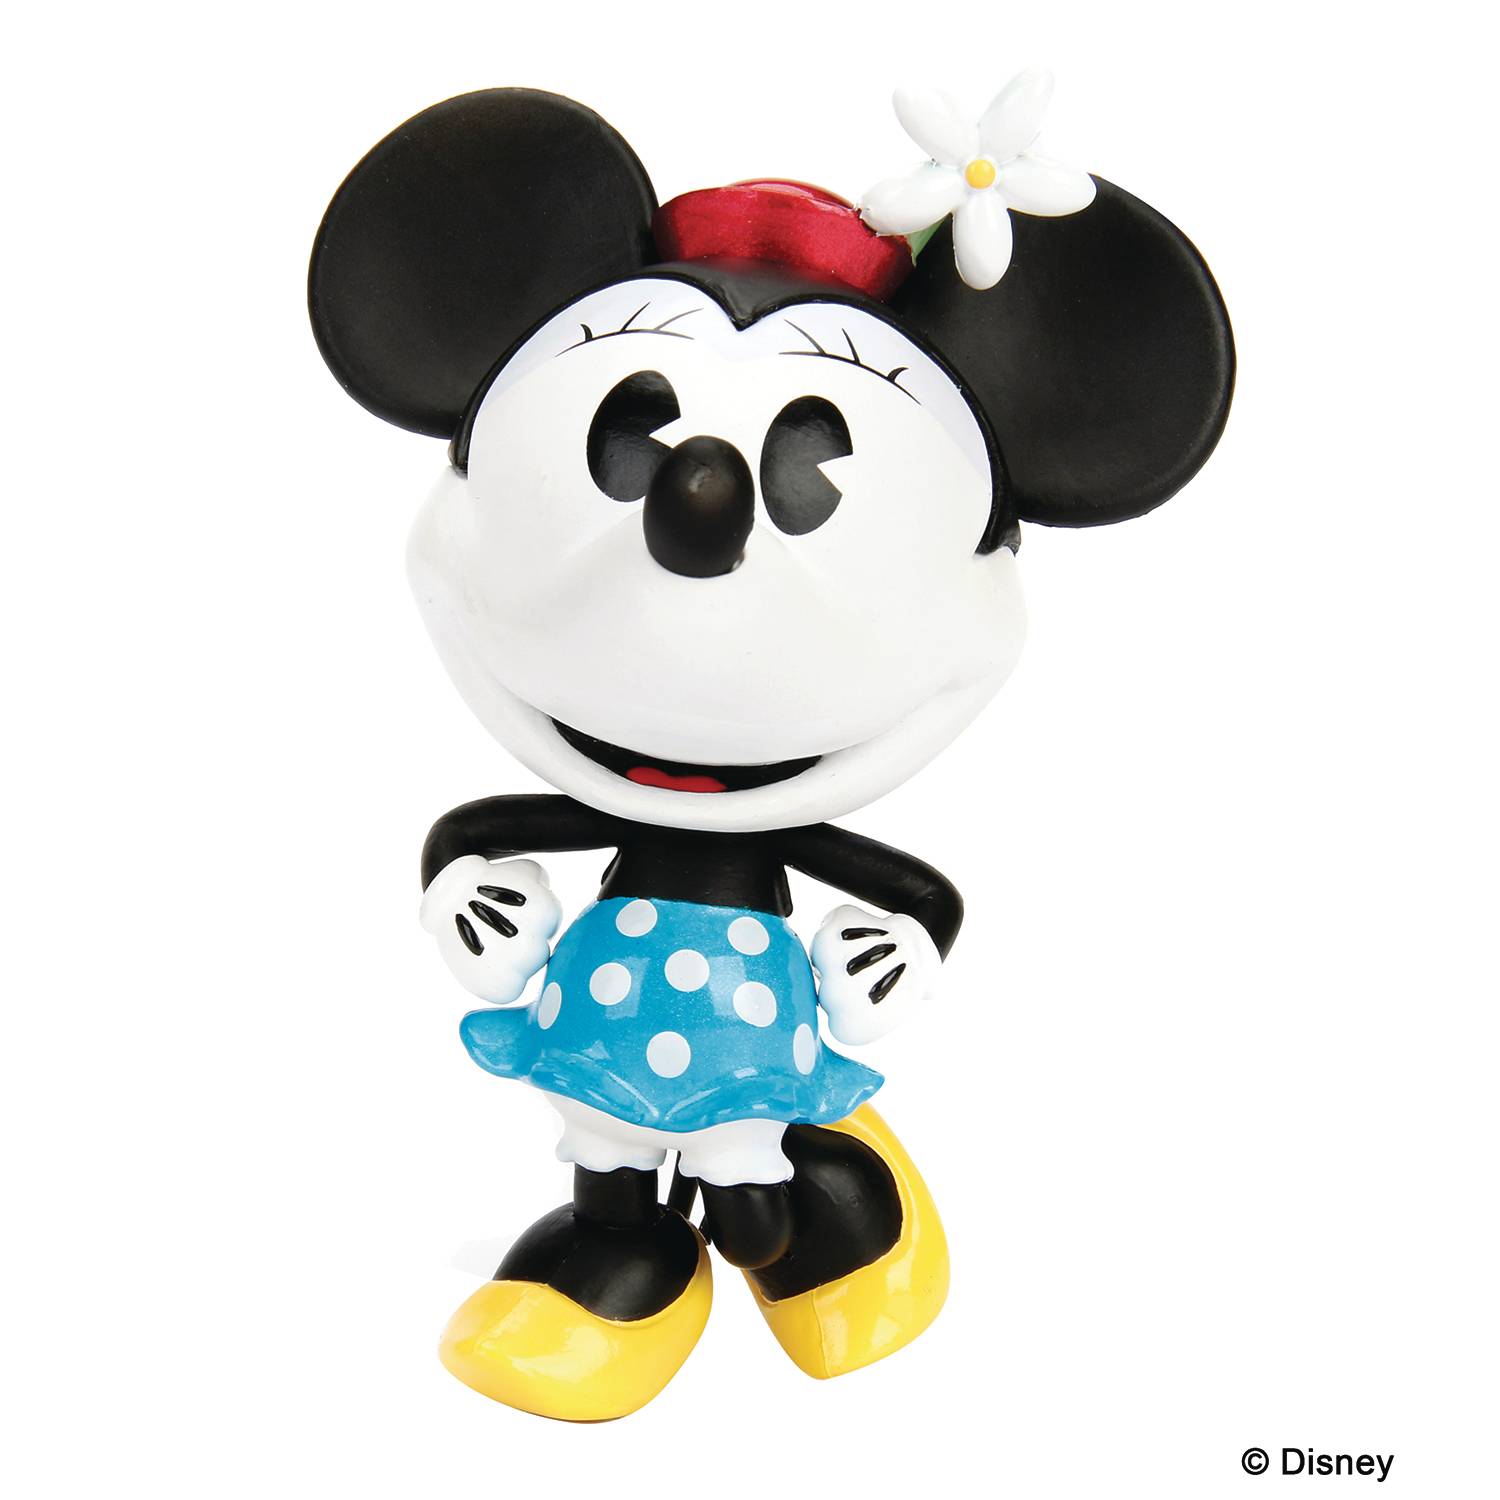 DISNEY CLASSIC MINNIE MOUSE 4IN DIE-CAST FIG